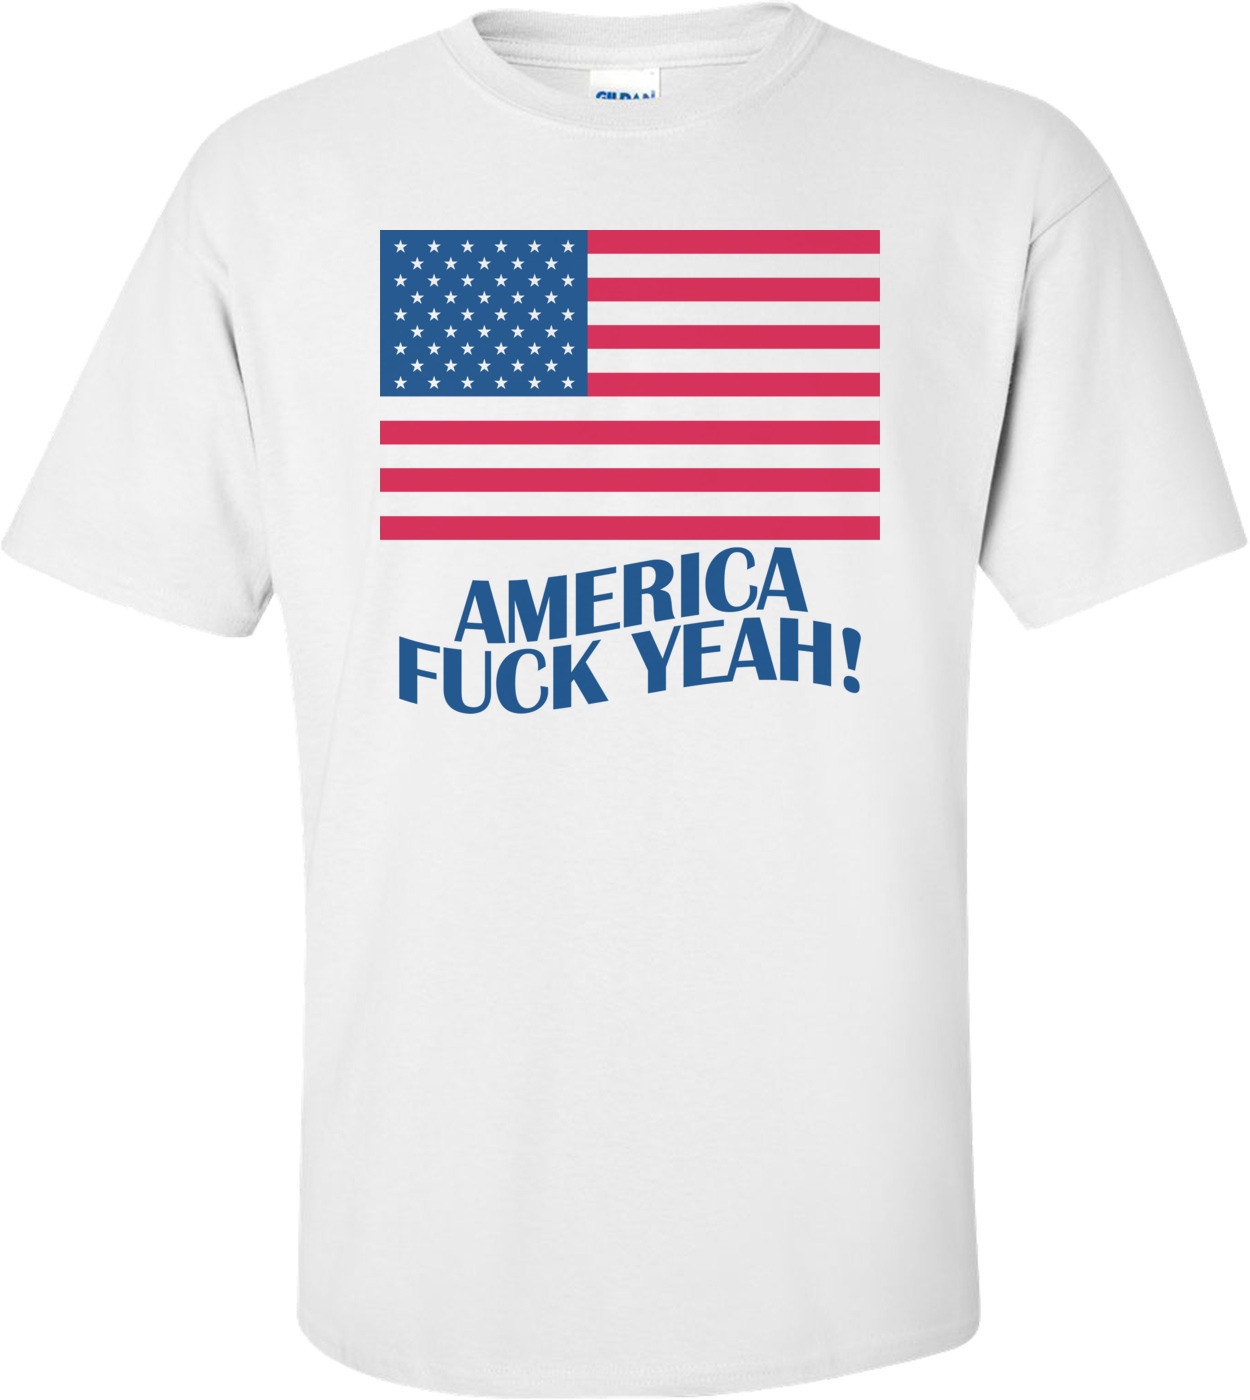 America Fuck Yeah! - Fourth Of July T-shirt